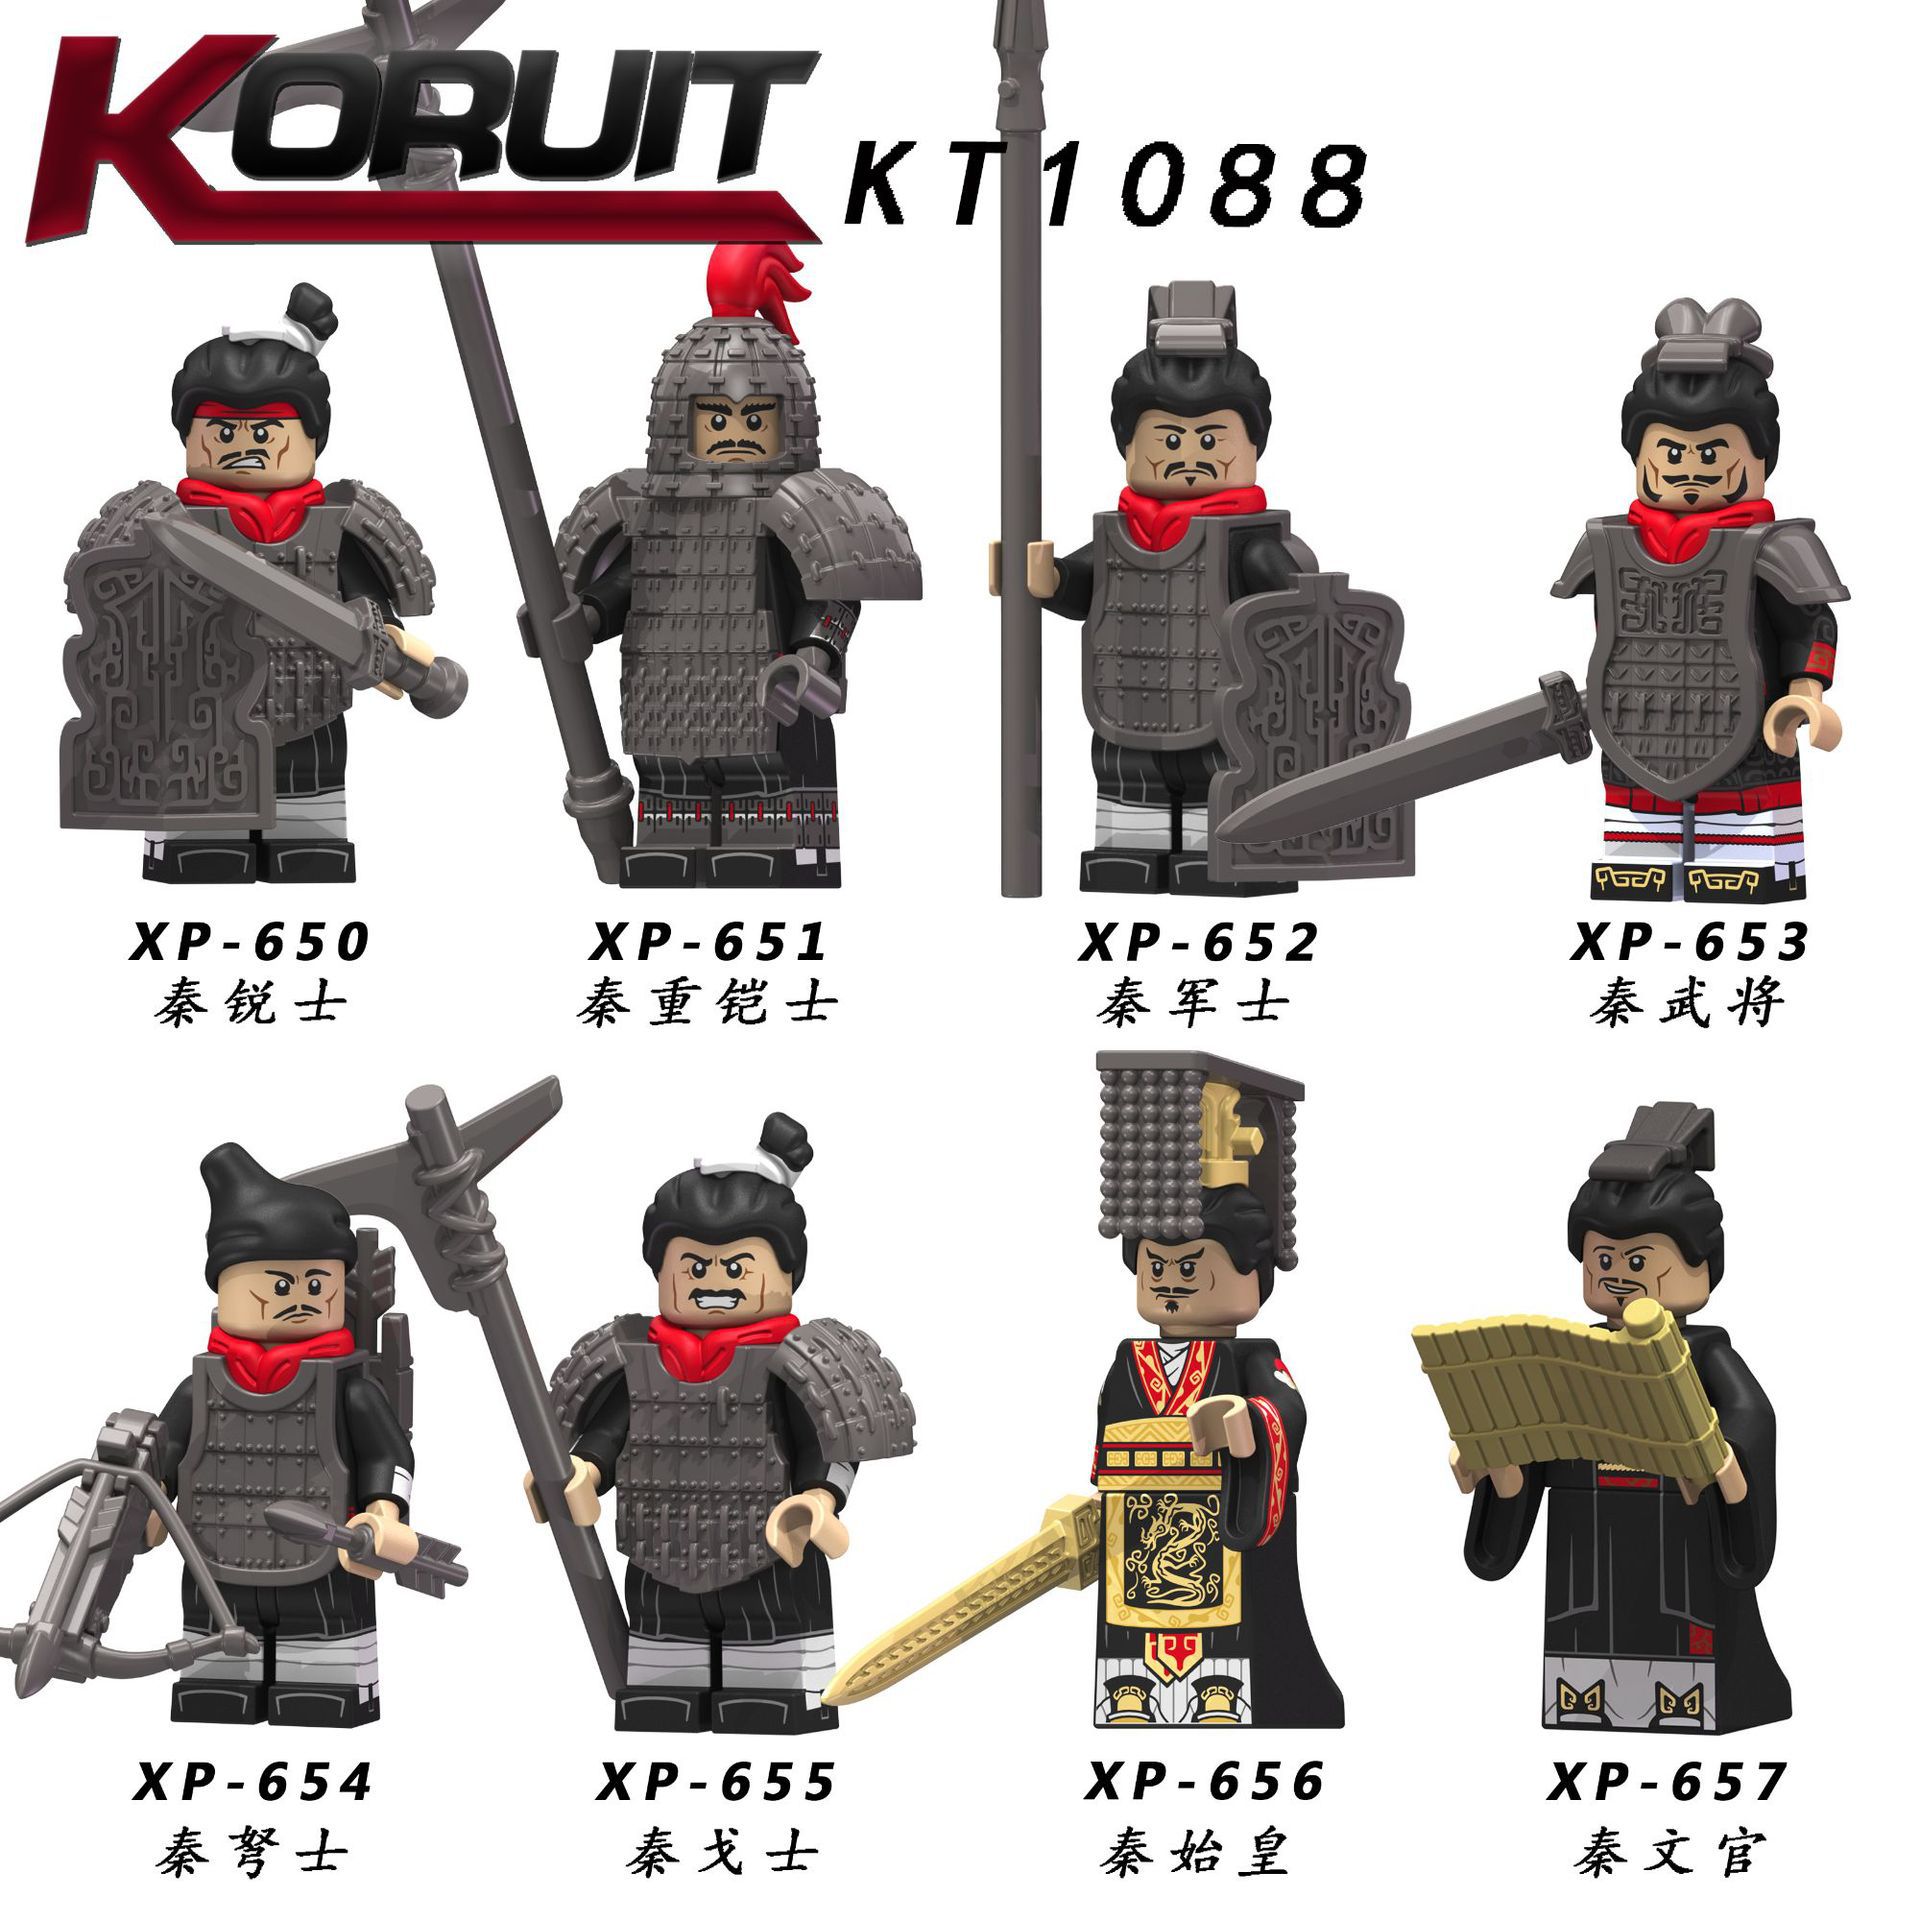 

KT1088 Ancient Soldier Minifigs Mini Toy Figures First Emperor of the Qin Dynasty Building Blocks